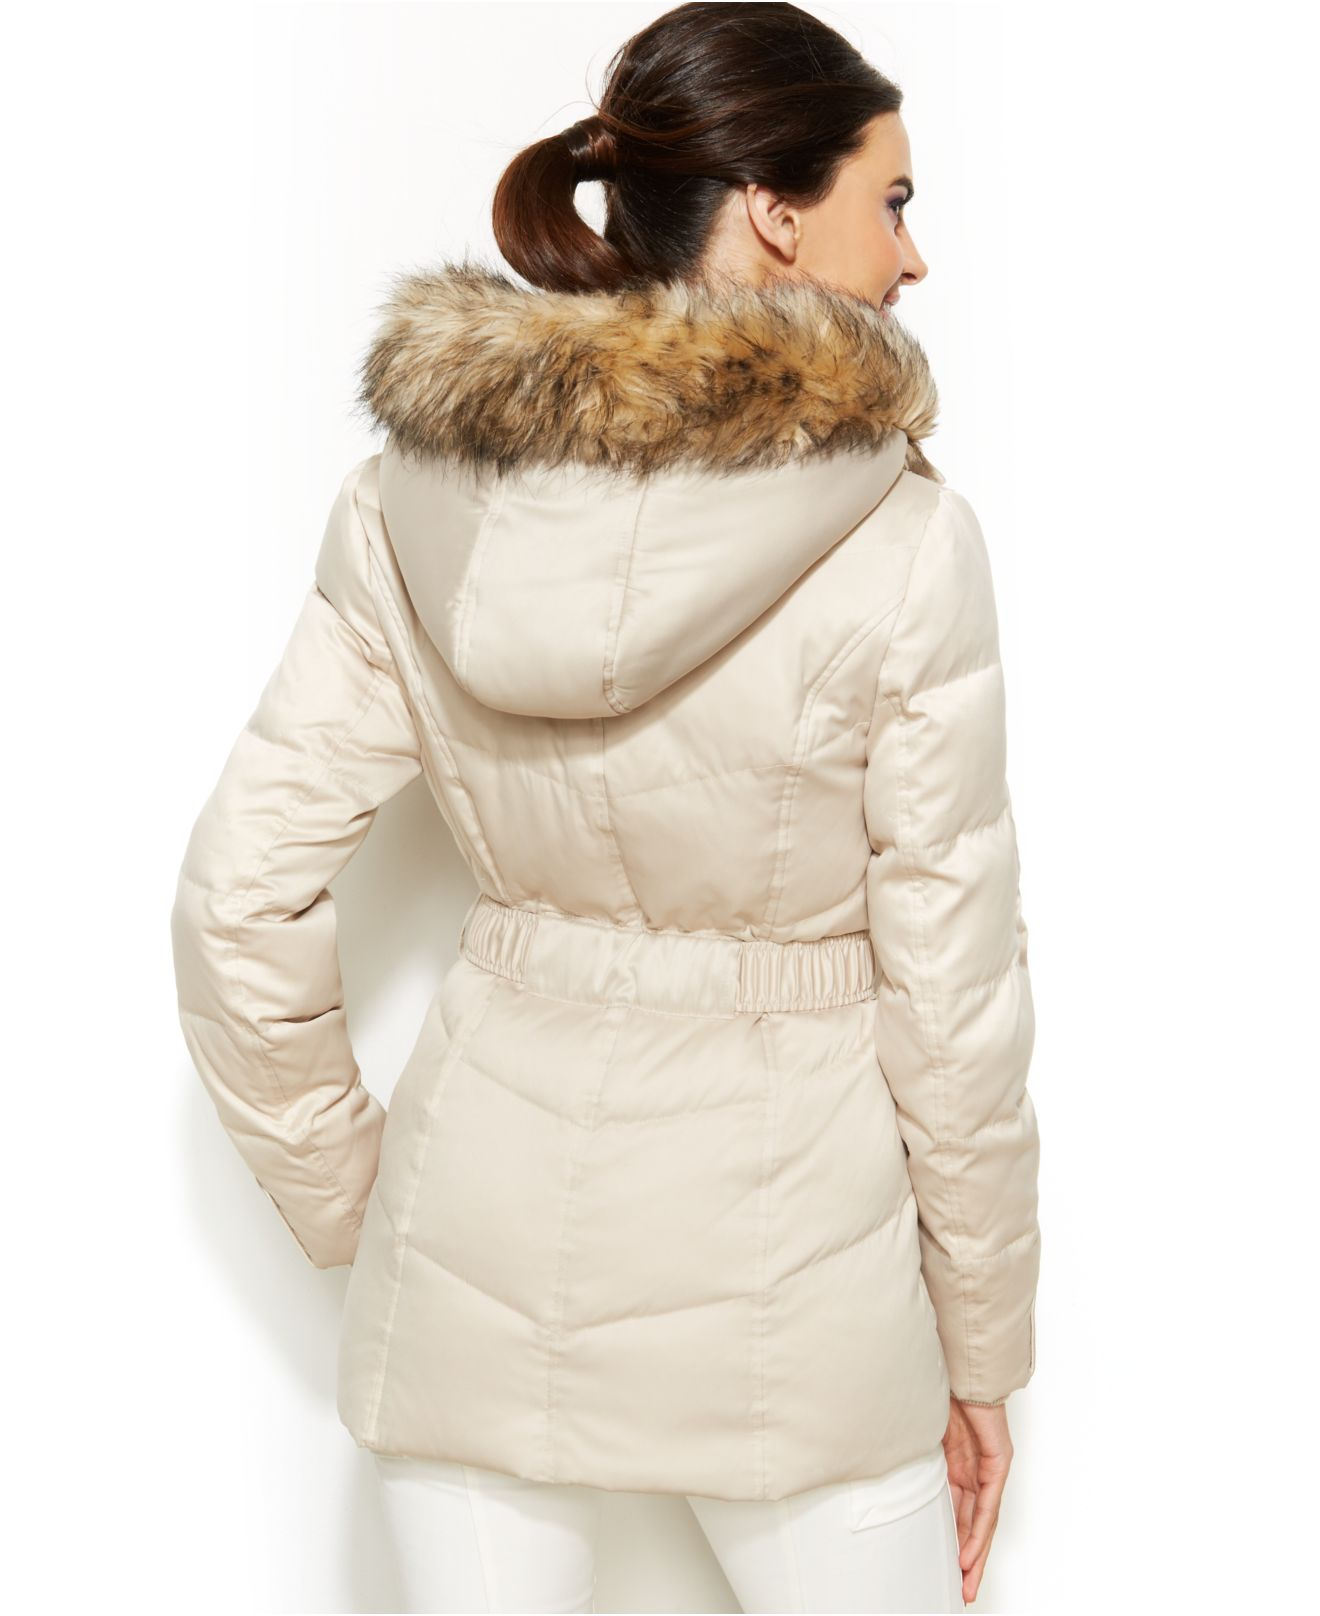 DKNY Hooded Faux-Fur-Trim Belted Down Puffer Coat in Beige (Natural) - Lyst